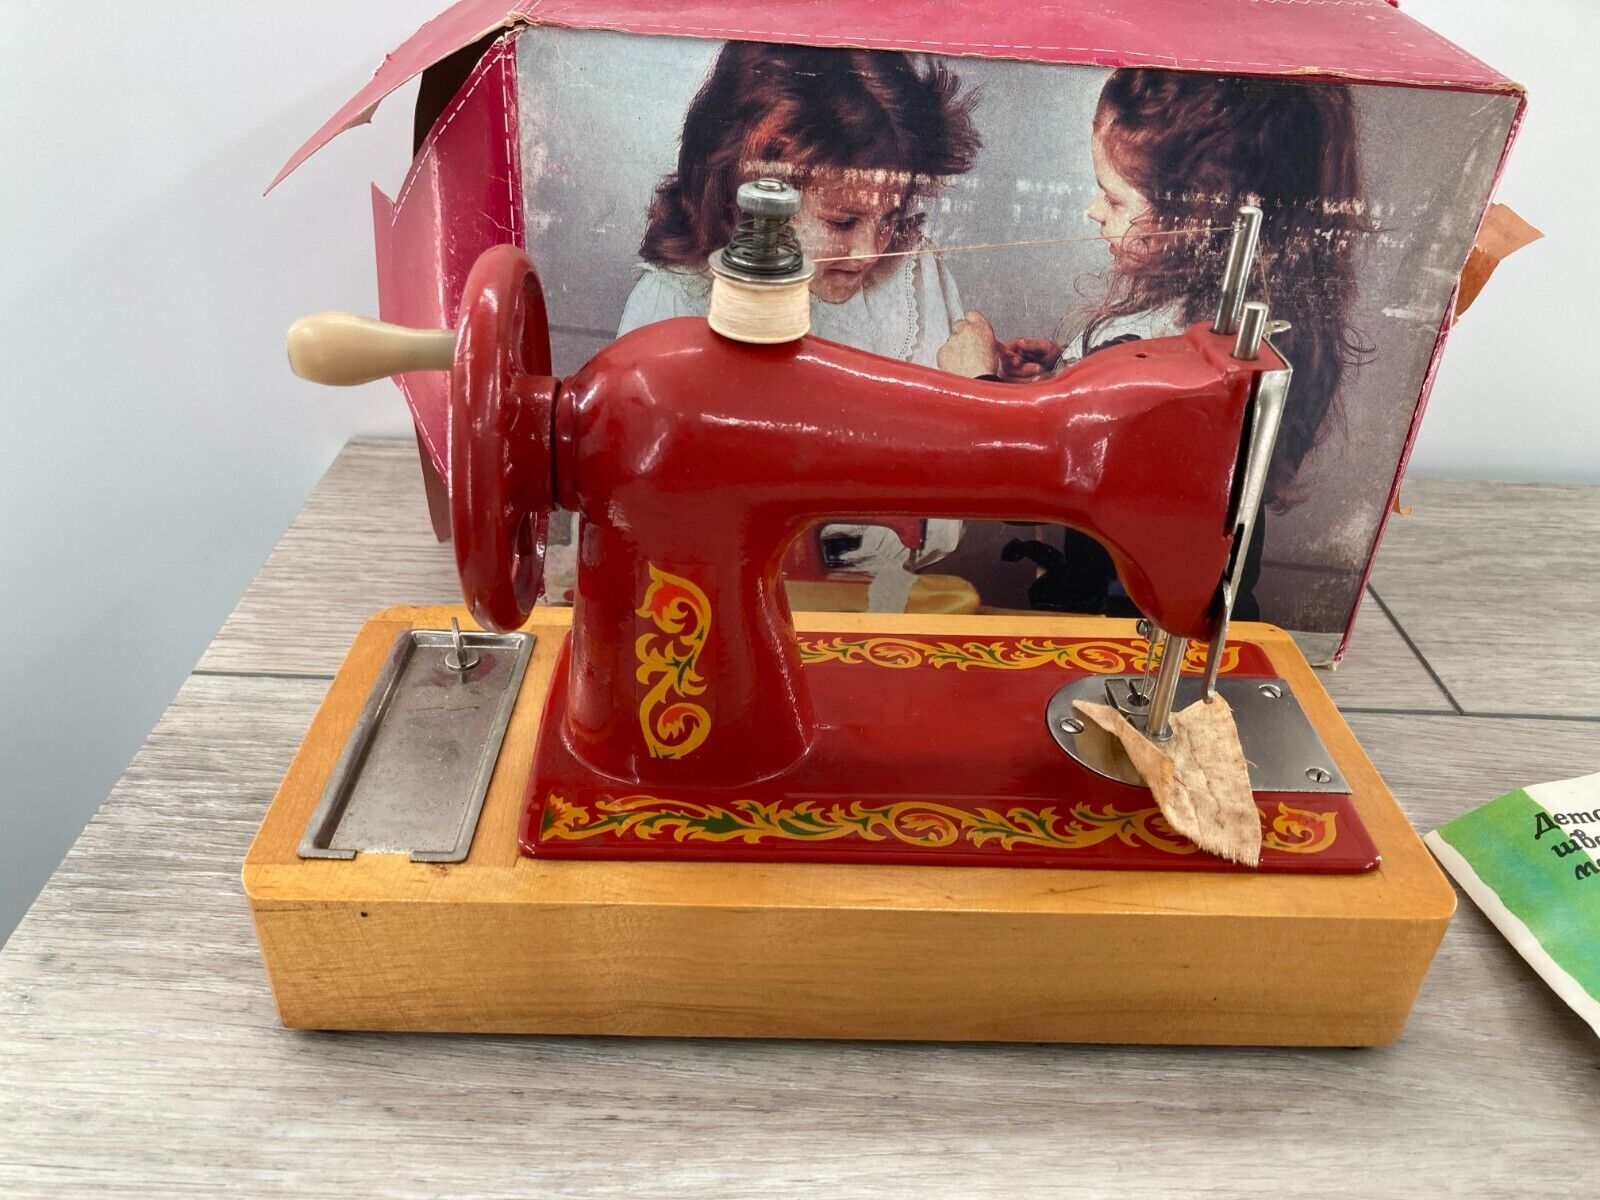 Vintage Russian Soviet Toy Sewing Machine for Children Metal Wood Box